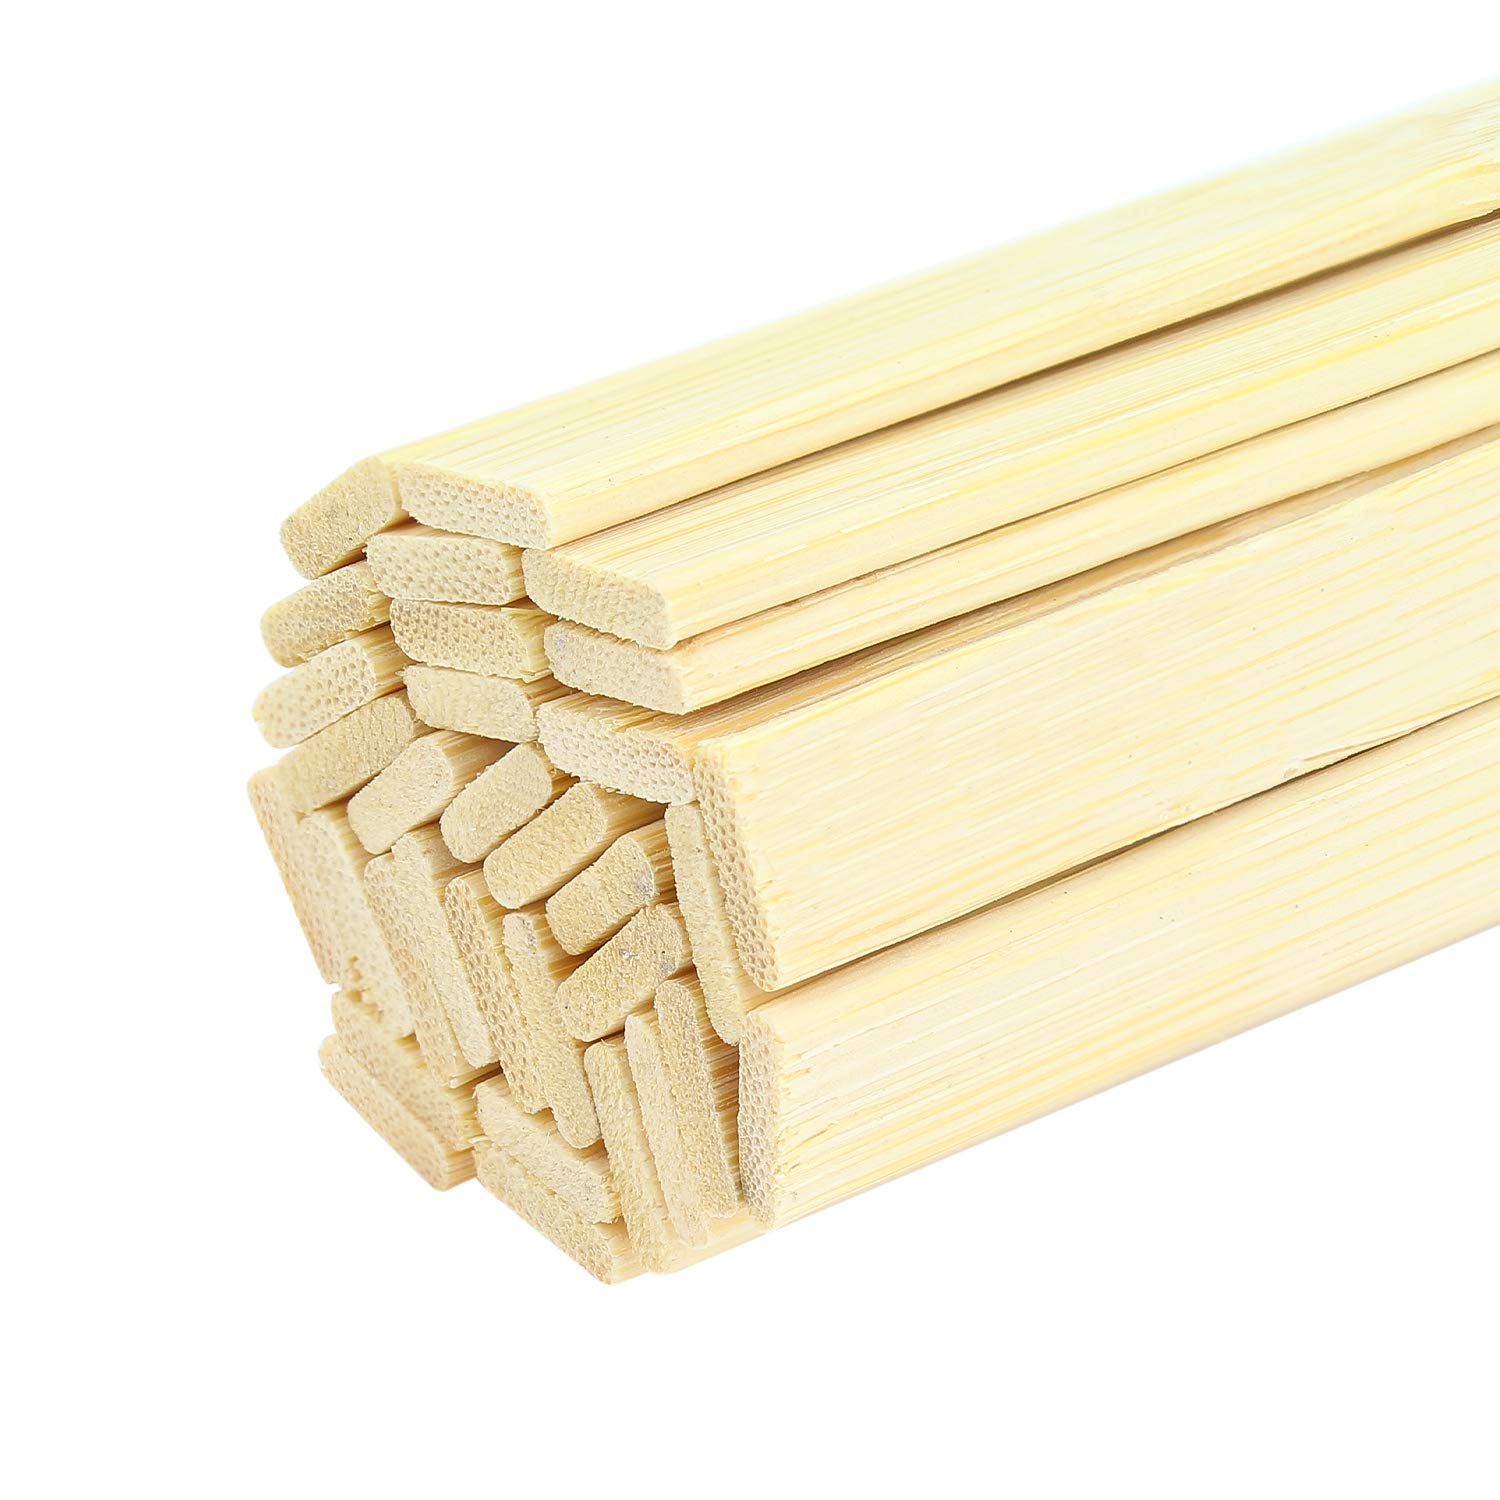 Bamboo Sticks For DIY Crafts Photo Props And Craft Supplies